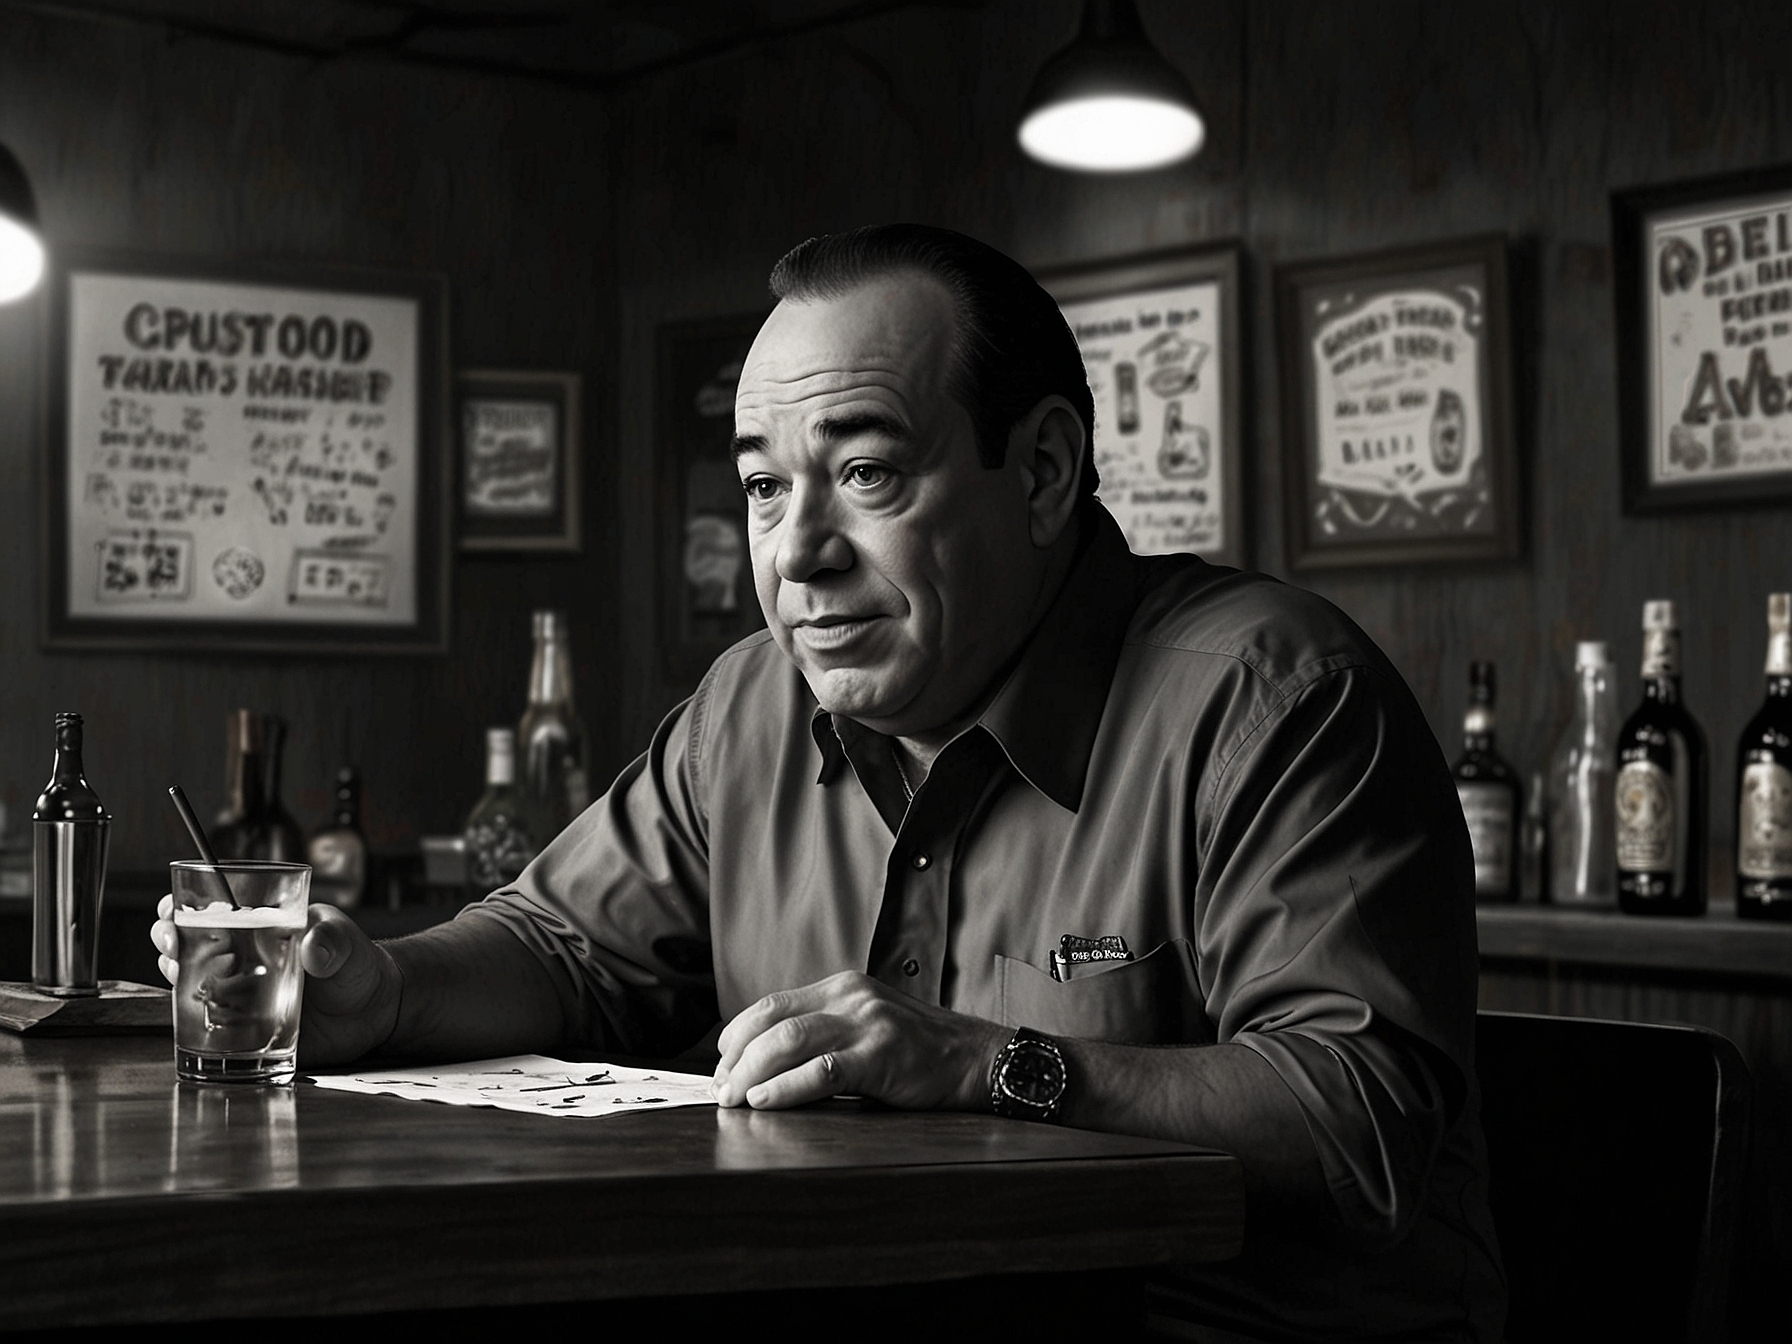 'Bar Rescue' episode scene where Jon Taffer is actively advising a struggling bar owner, illustrating the show's focus on actionable advice and emotional storytelling to engage viewers.